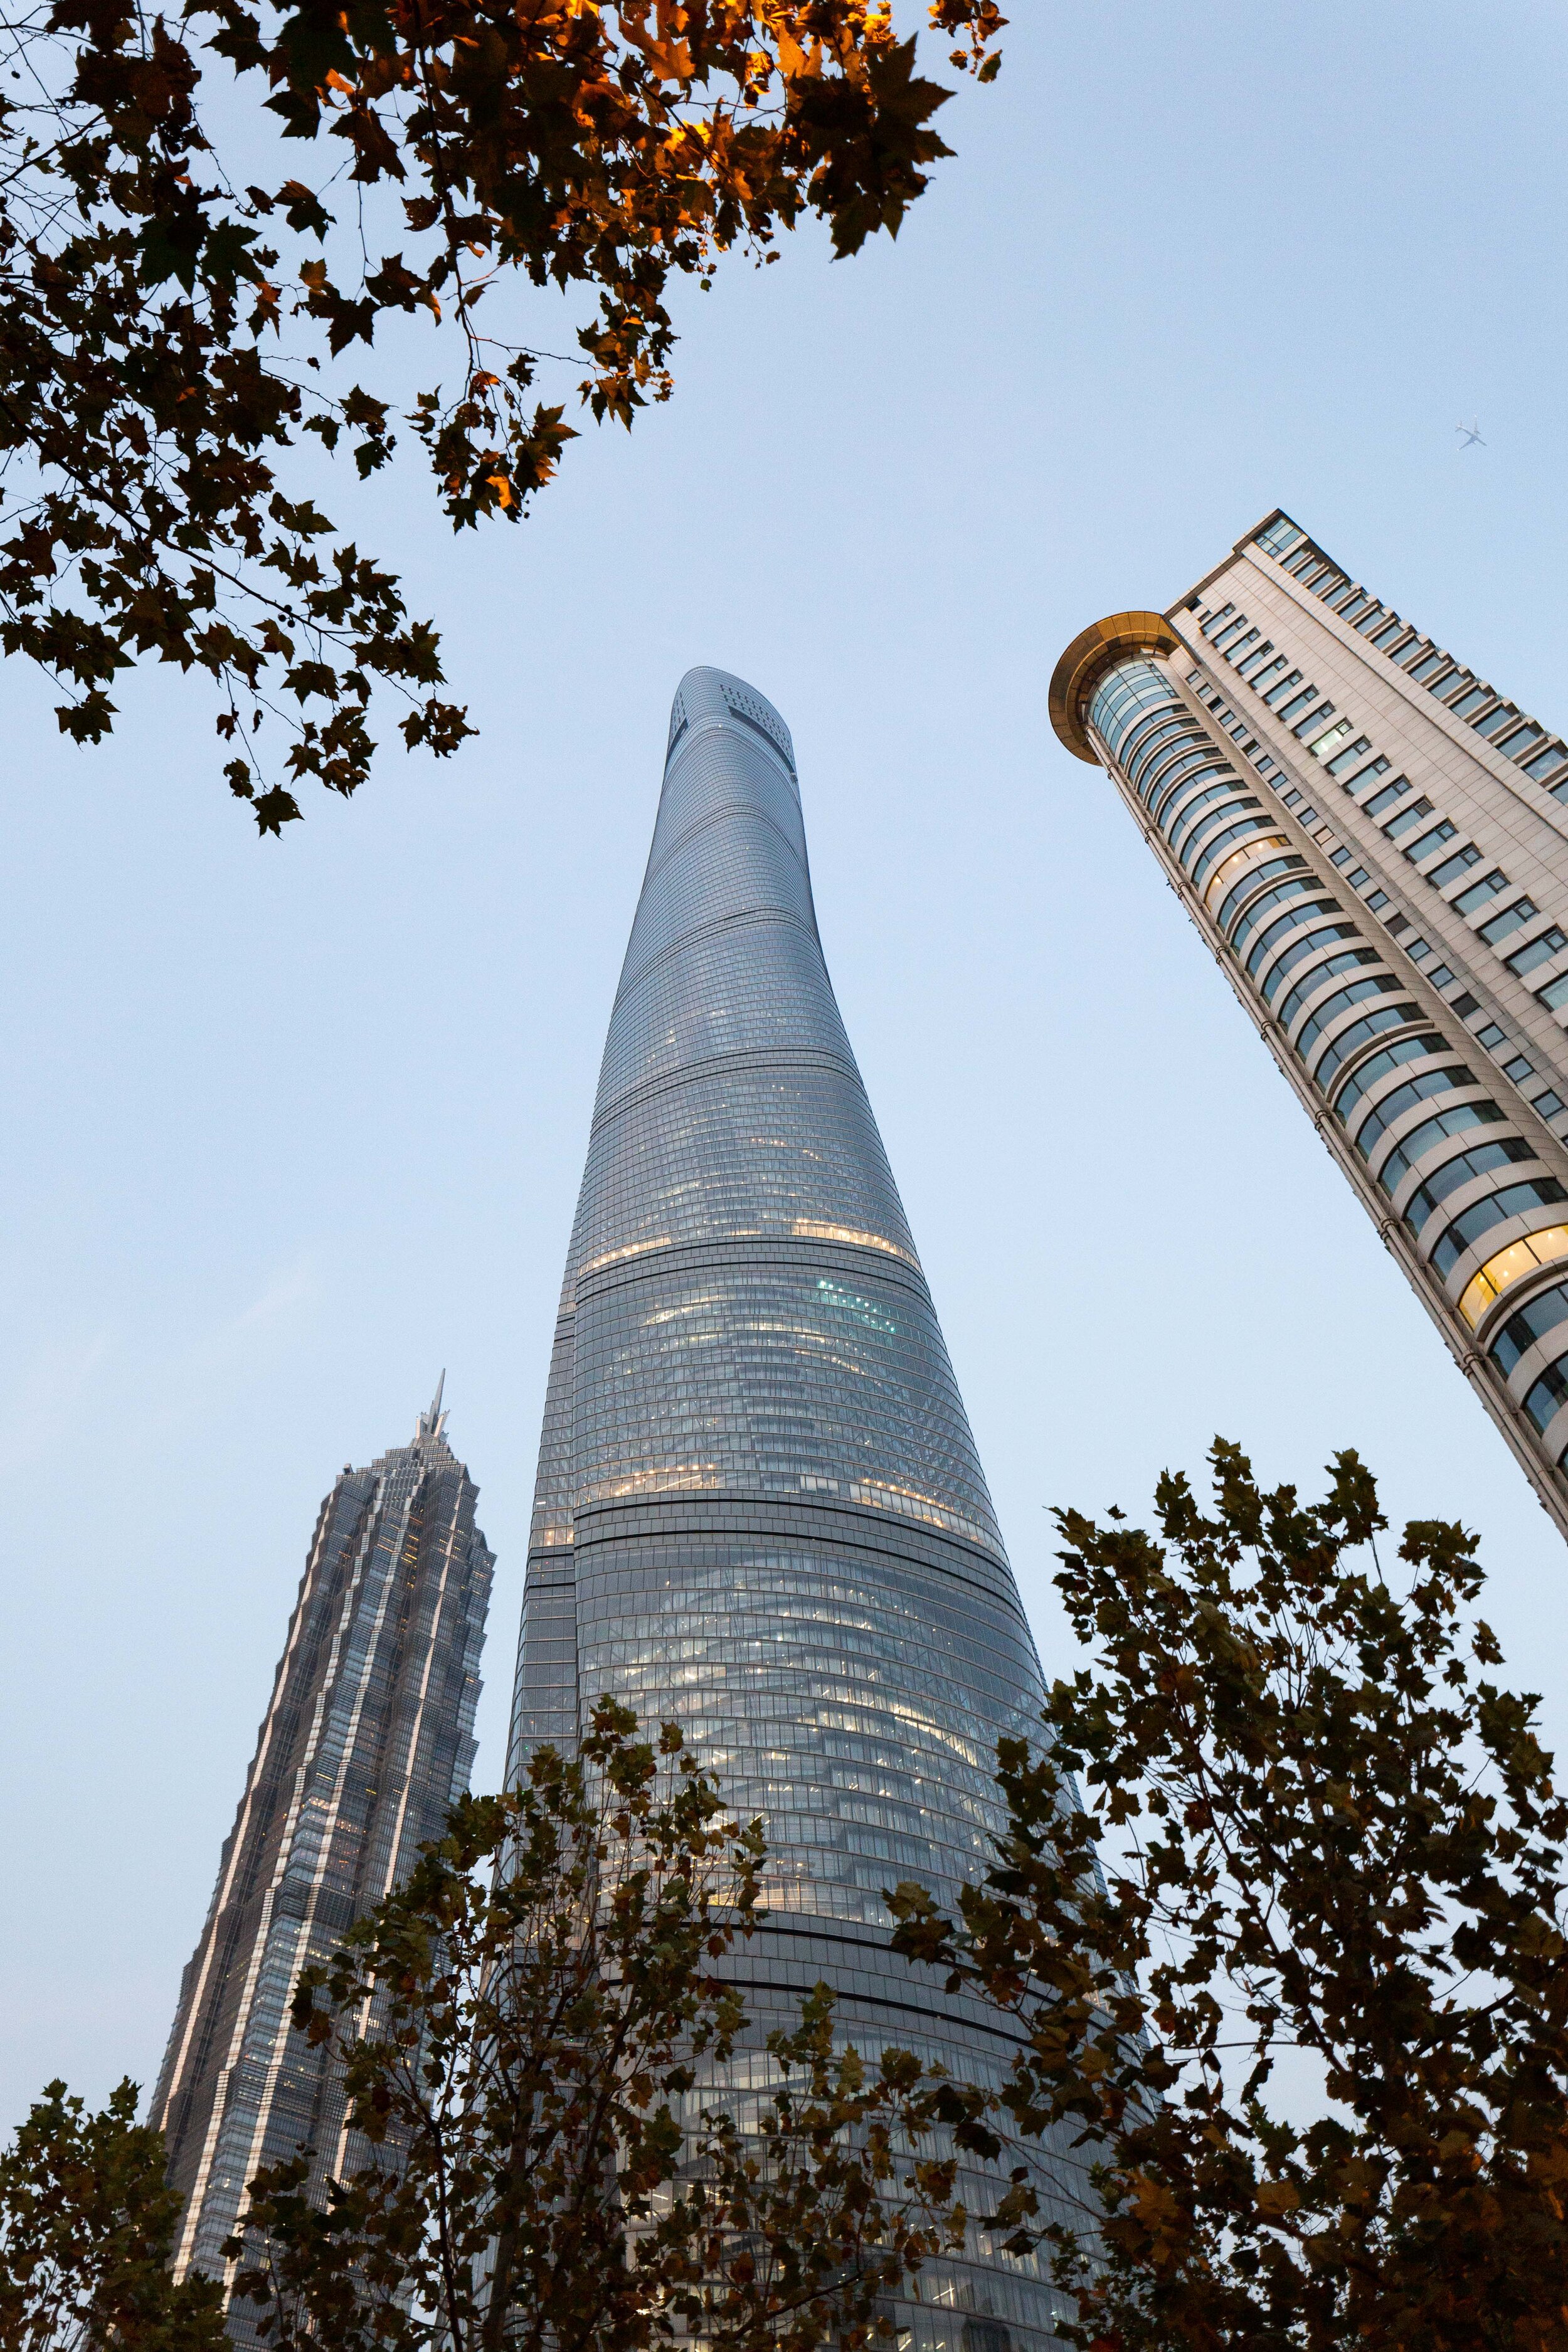 shanghai tower is the world's second tallest building